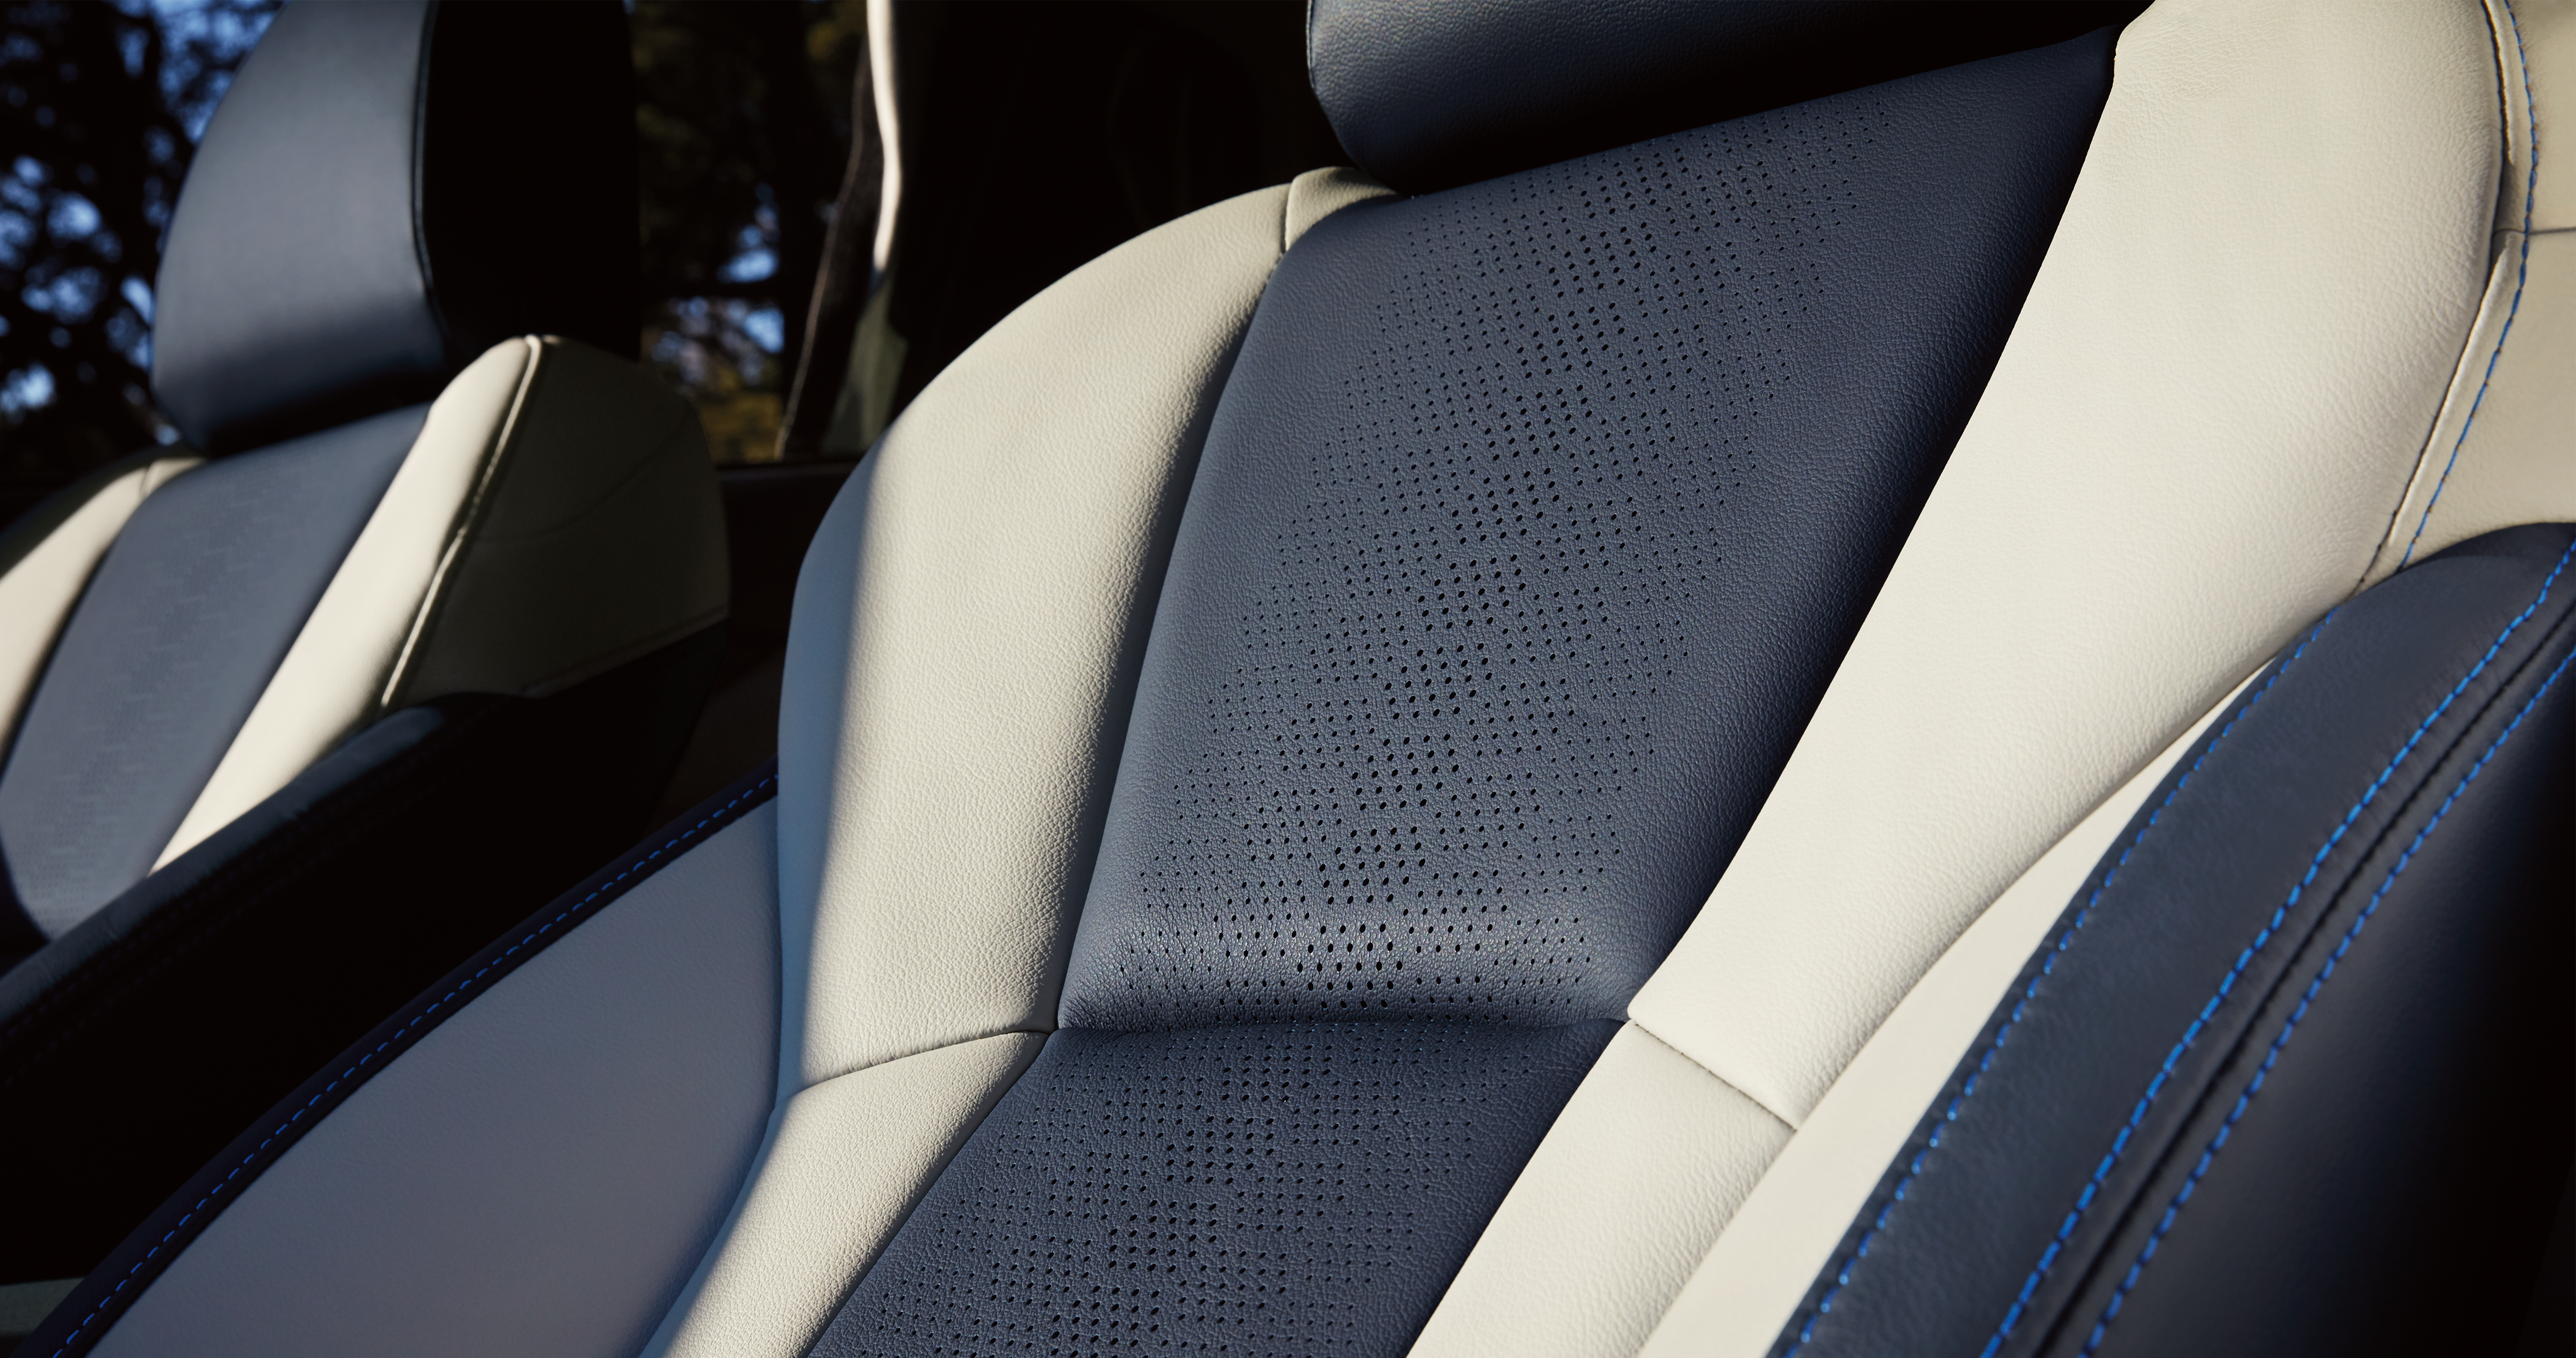  A close-up of the high-contrast navy and gray leather seats in the 2023 Crosstrek Hybrid.